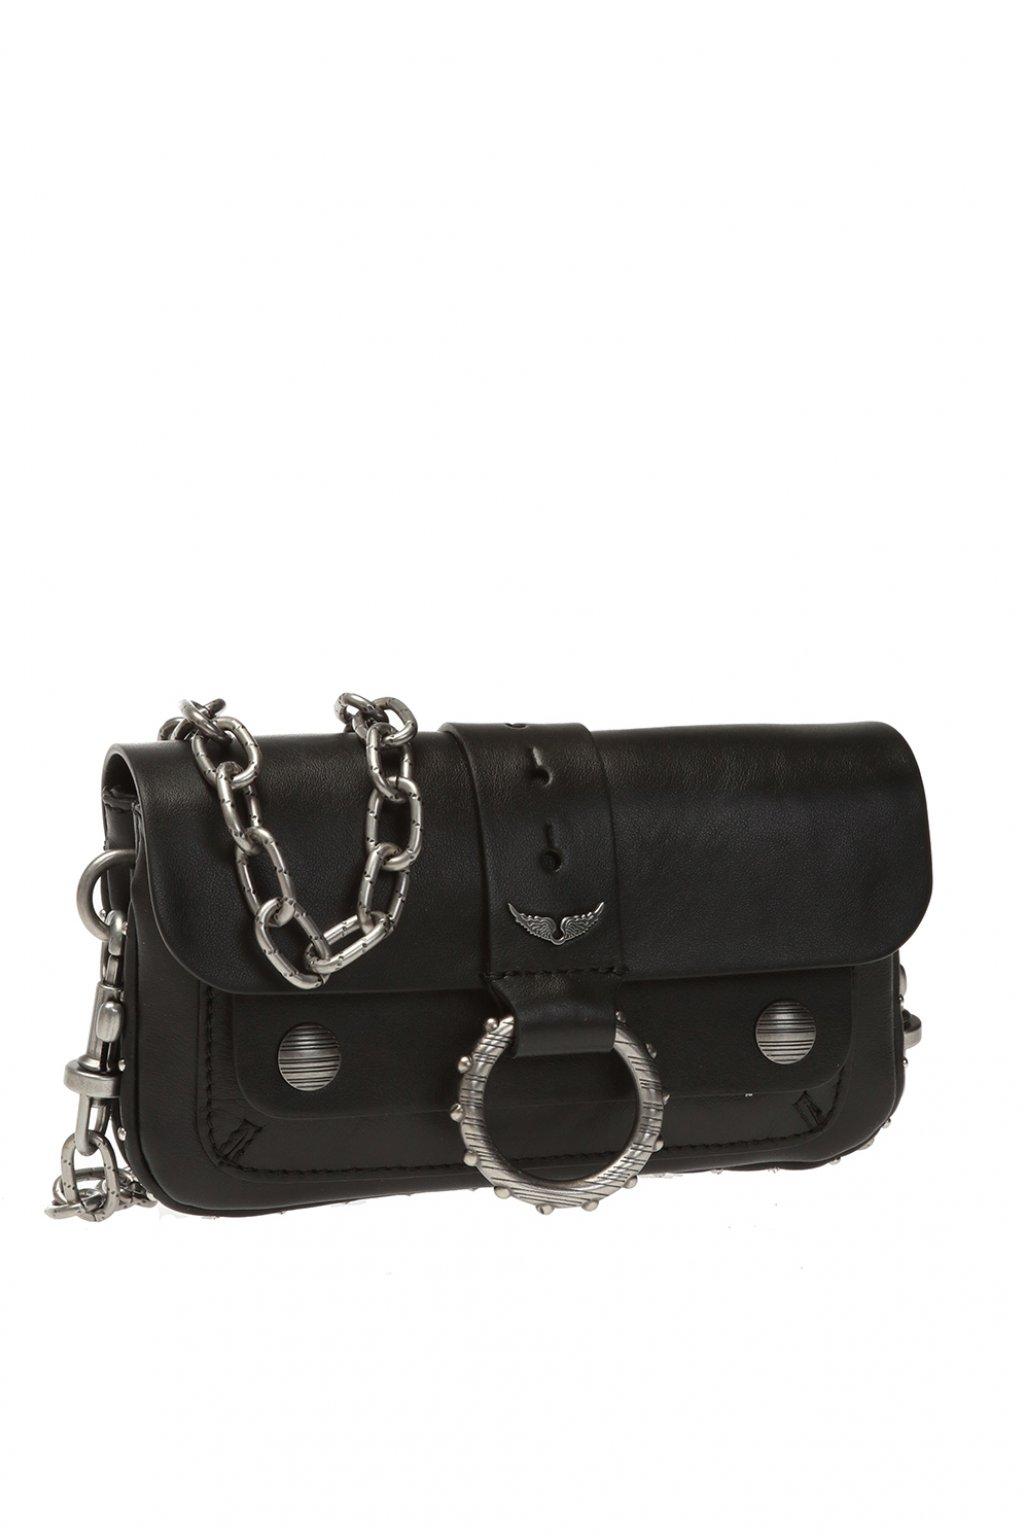 Zadig & Voltaire X Kate Moss Black Wallet On Silver Chain Bag NWT BLACK